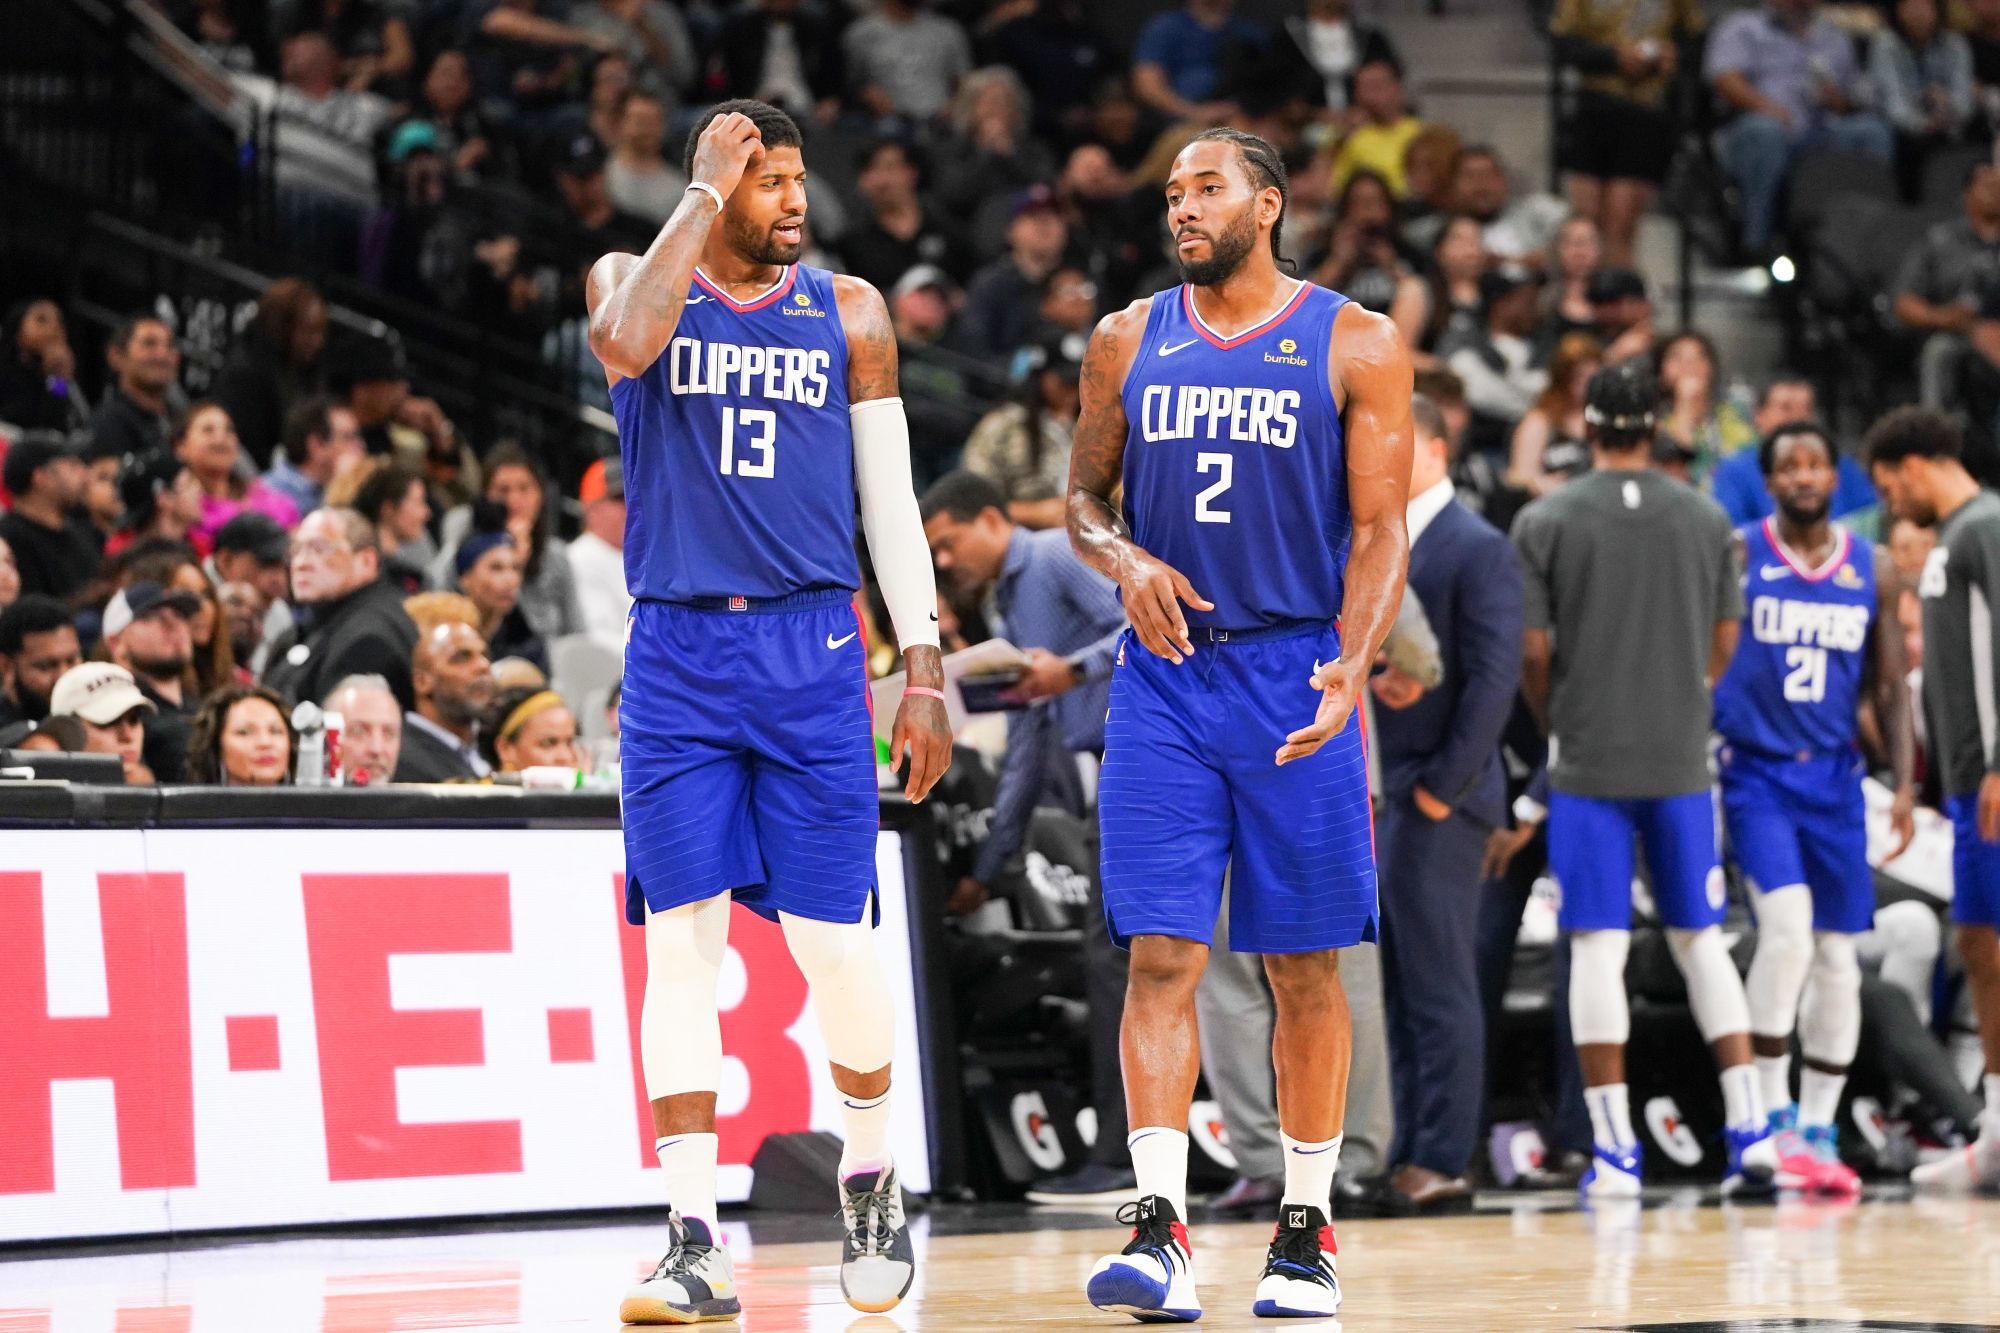 Nov 29, 2019; San Antonio, TX, USA; LA Clippers forward Paul George (13) and forward Kawhi Leonard (2) speak during the second half against the San Antonio Spurs at the AT&T Center. Mandatory Credit: Daniel Dunn-USA TODAY Sports/Sipa USA 

Photo by Icon Sport - Paul GEORGE - Kawhi LEONARD - AT&T Center - San Antonio (Etats Unis)